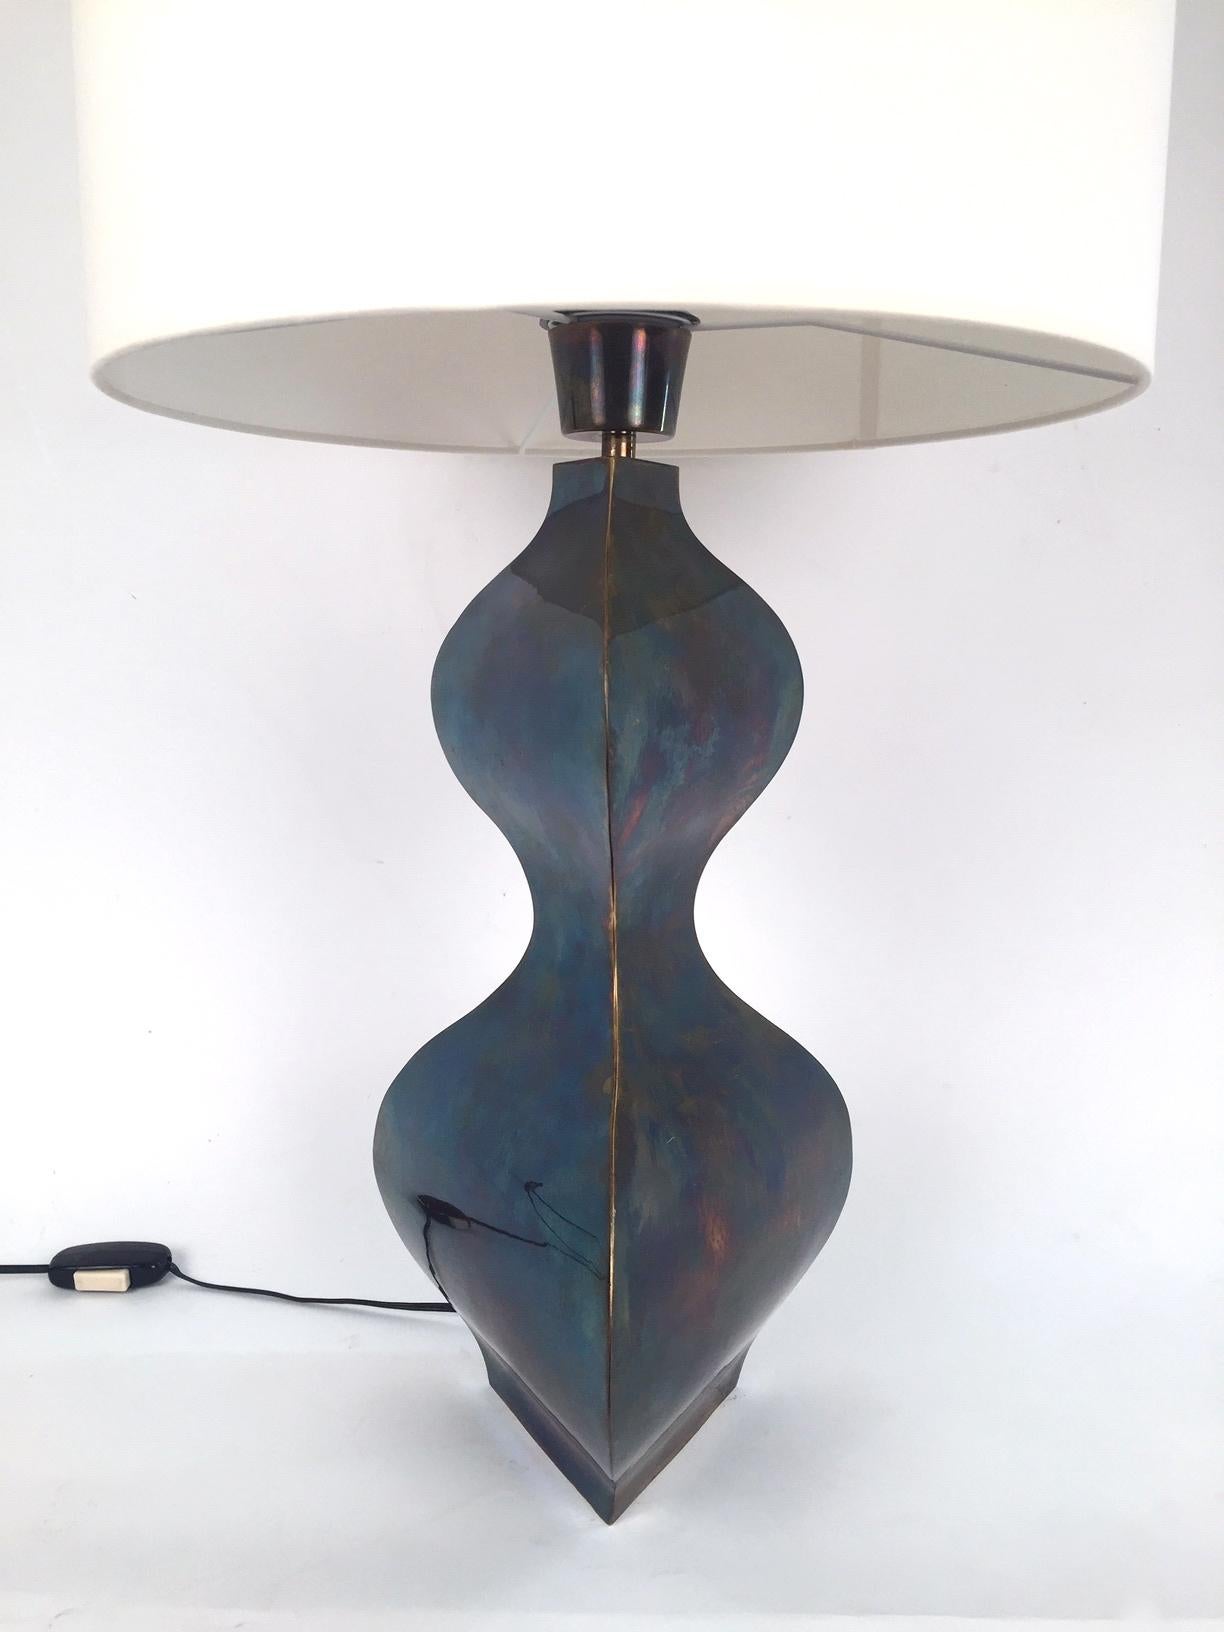  A single Spanish table lamp edited by Artespaña in the 1970s. Patinated metal and handmade shade. Base height 48 cm. Shade height 30cm.